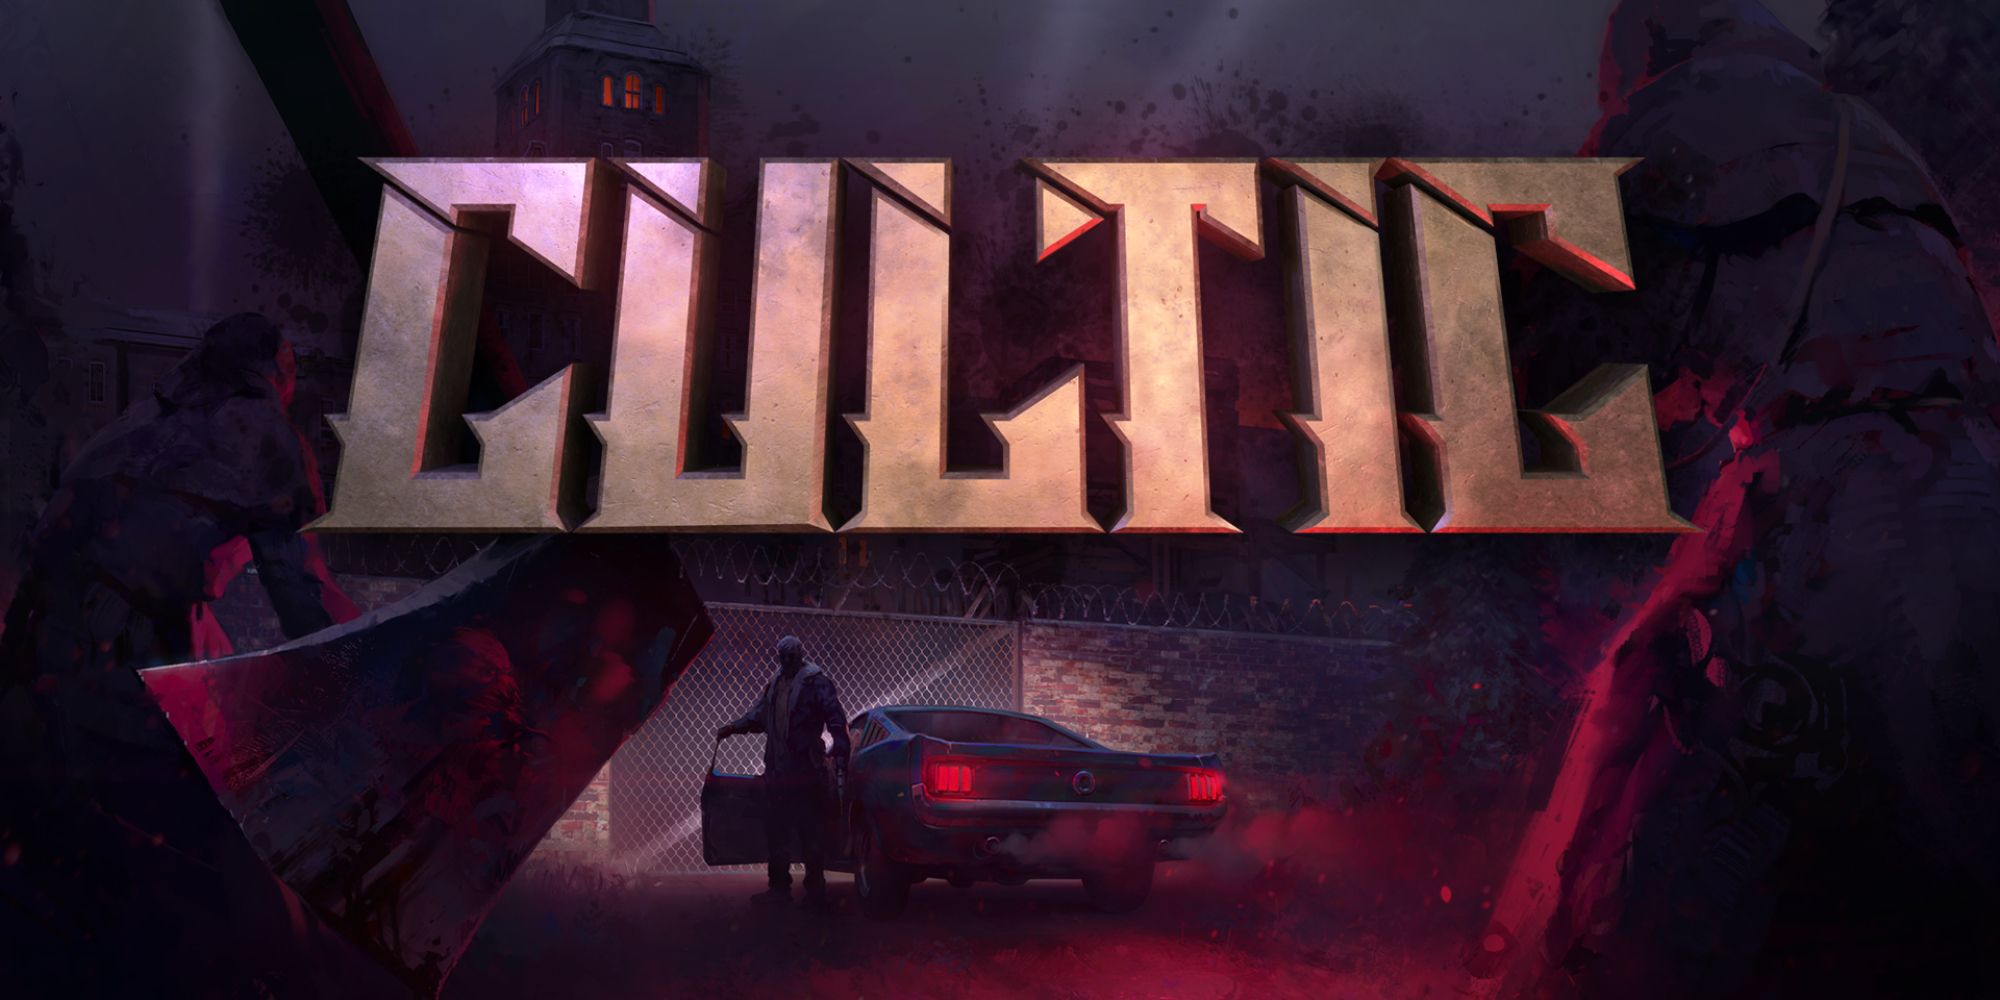 Cultic Preview game title and key art